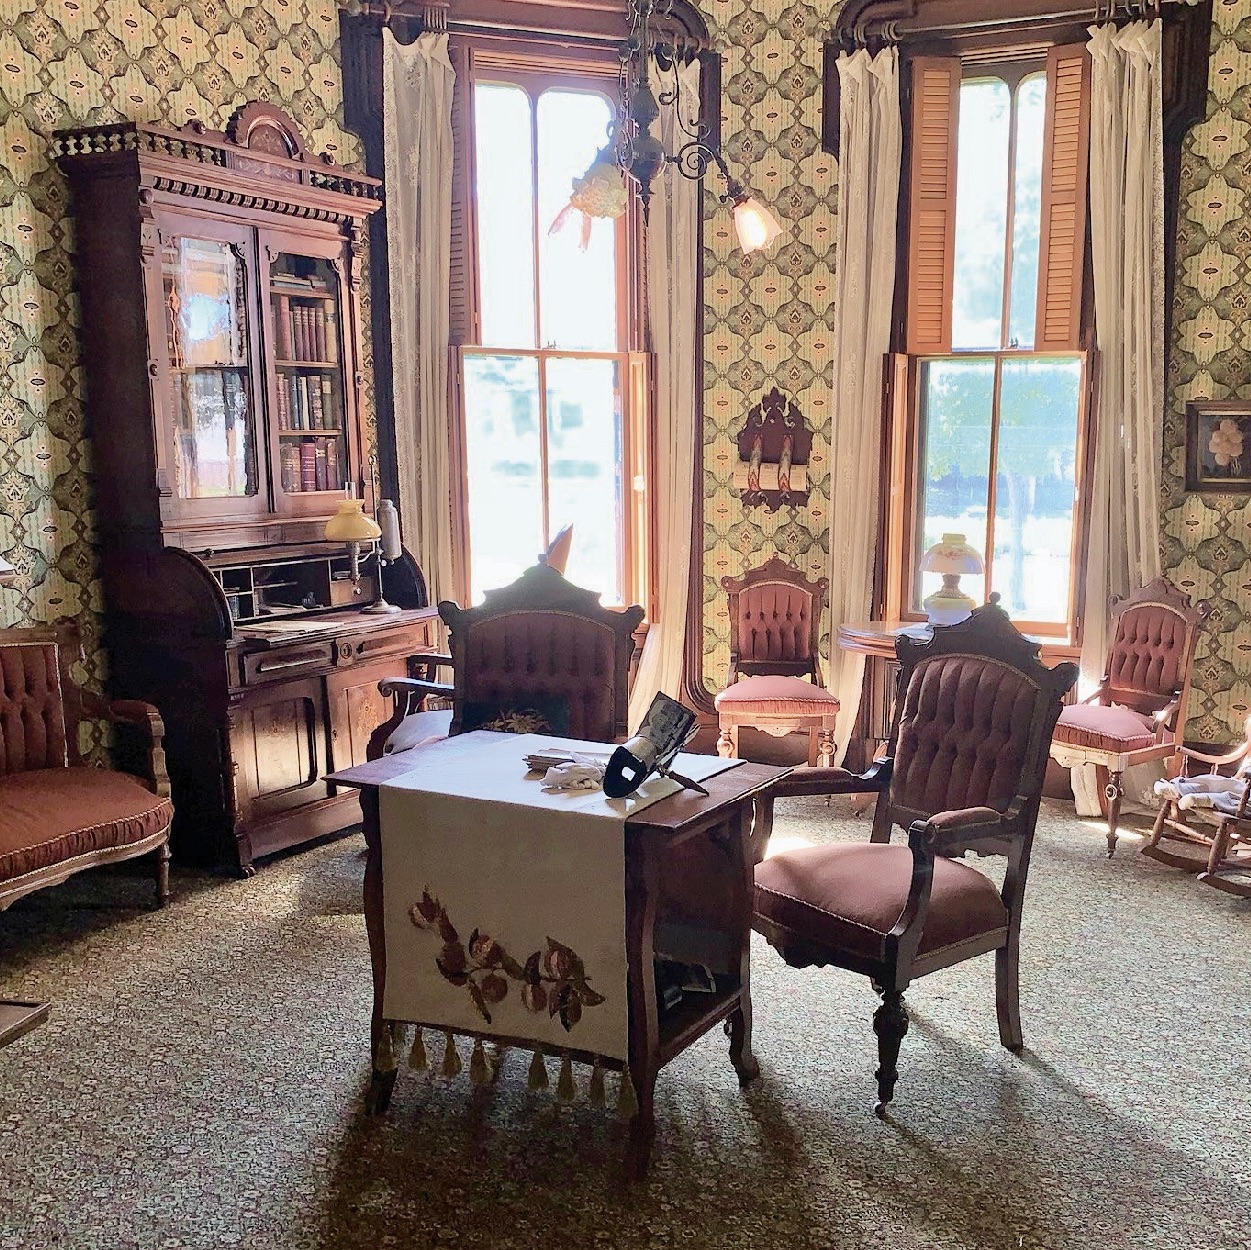 Picture of Isaac Cappon's office and sitting room in the Cappon House